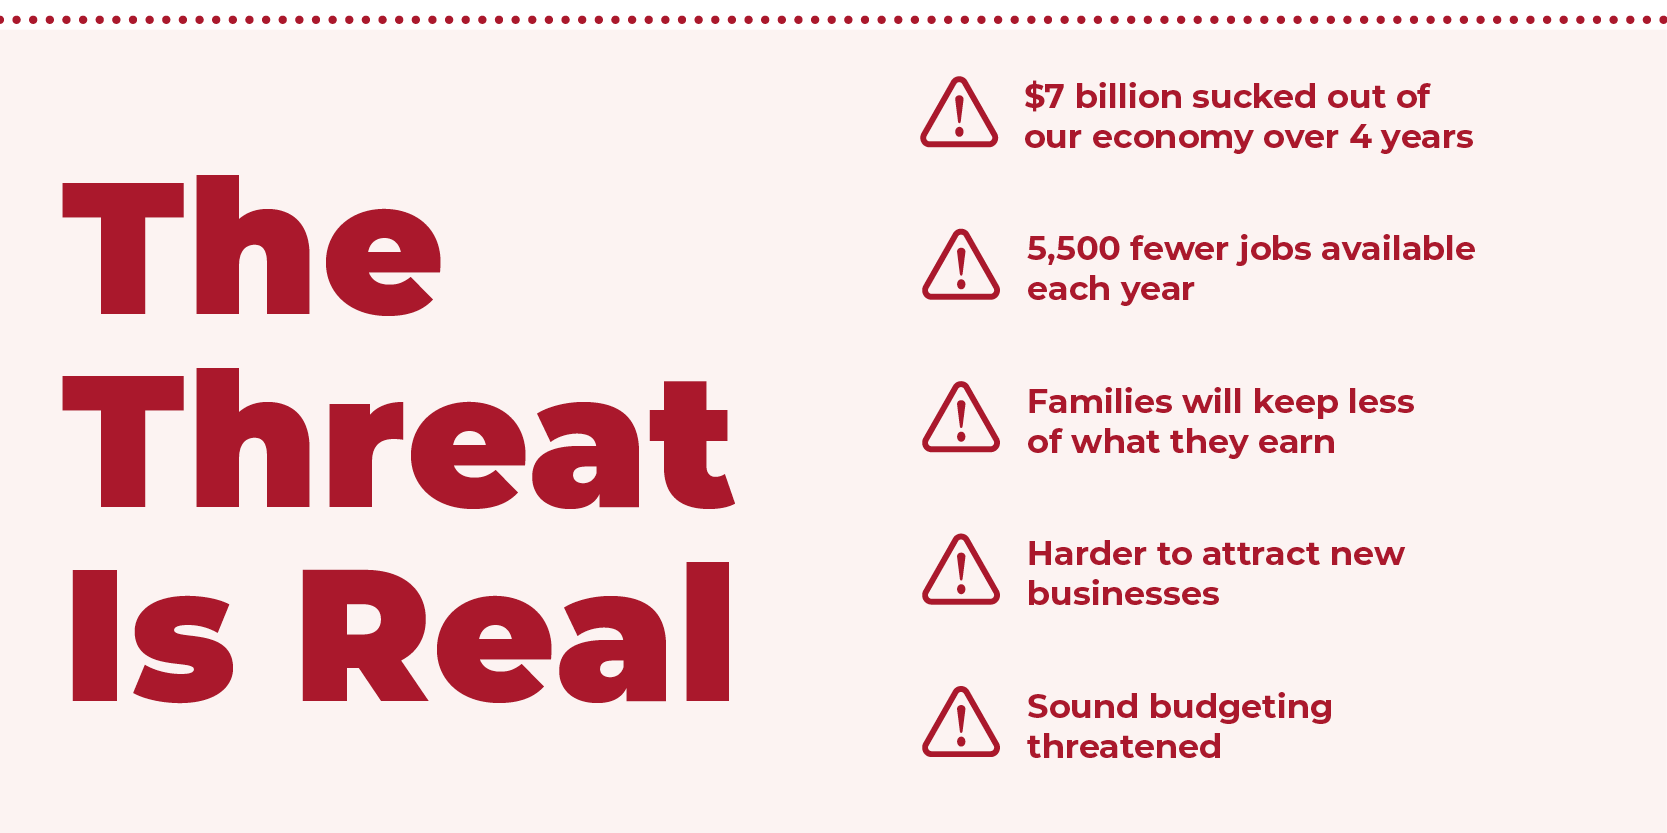 The Threat is real: $7 billion sucked out of our economy over 4 years, 5,500 fewer jobs available each year, Families will keep less of what they earn, Harder to attract new businesses, Sound budgeting threatened